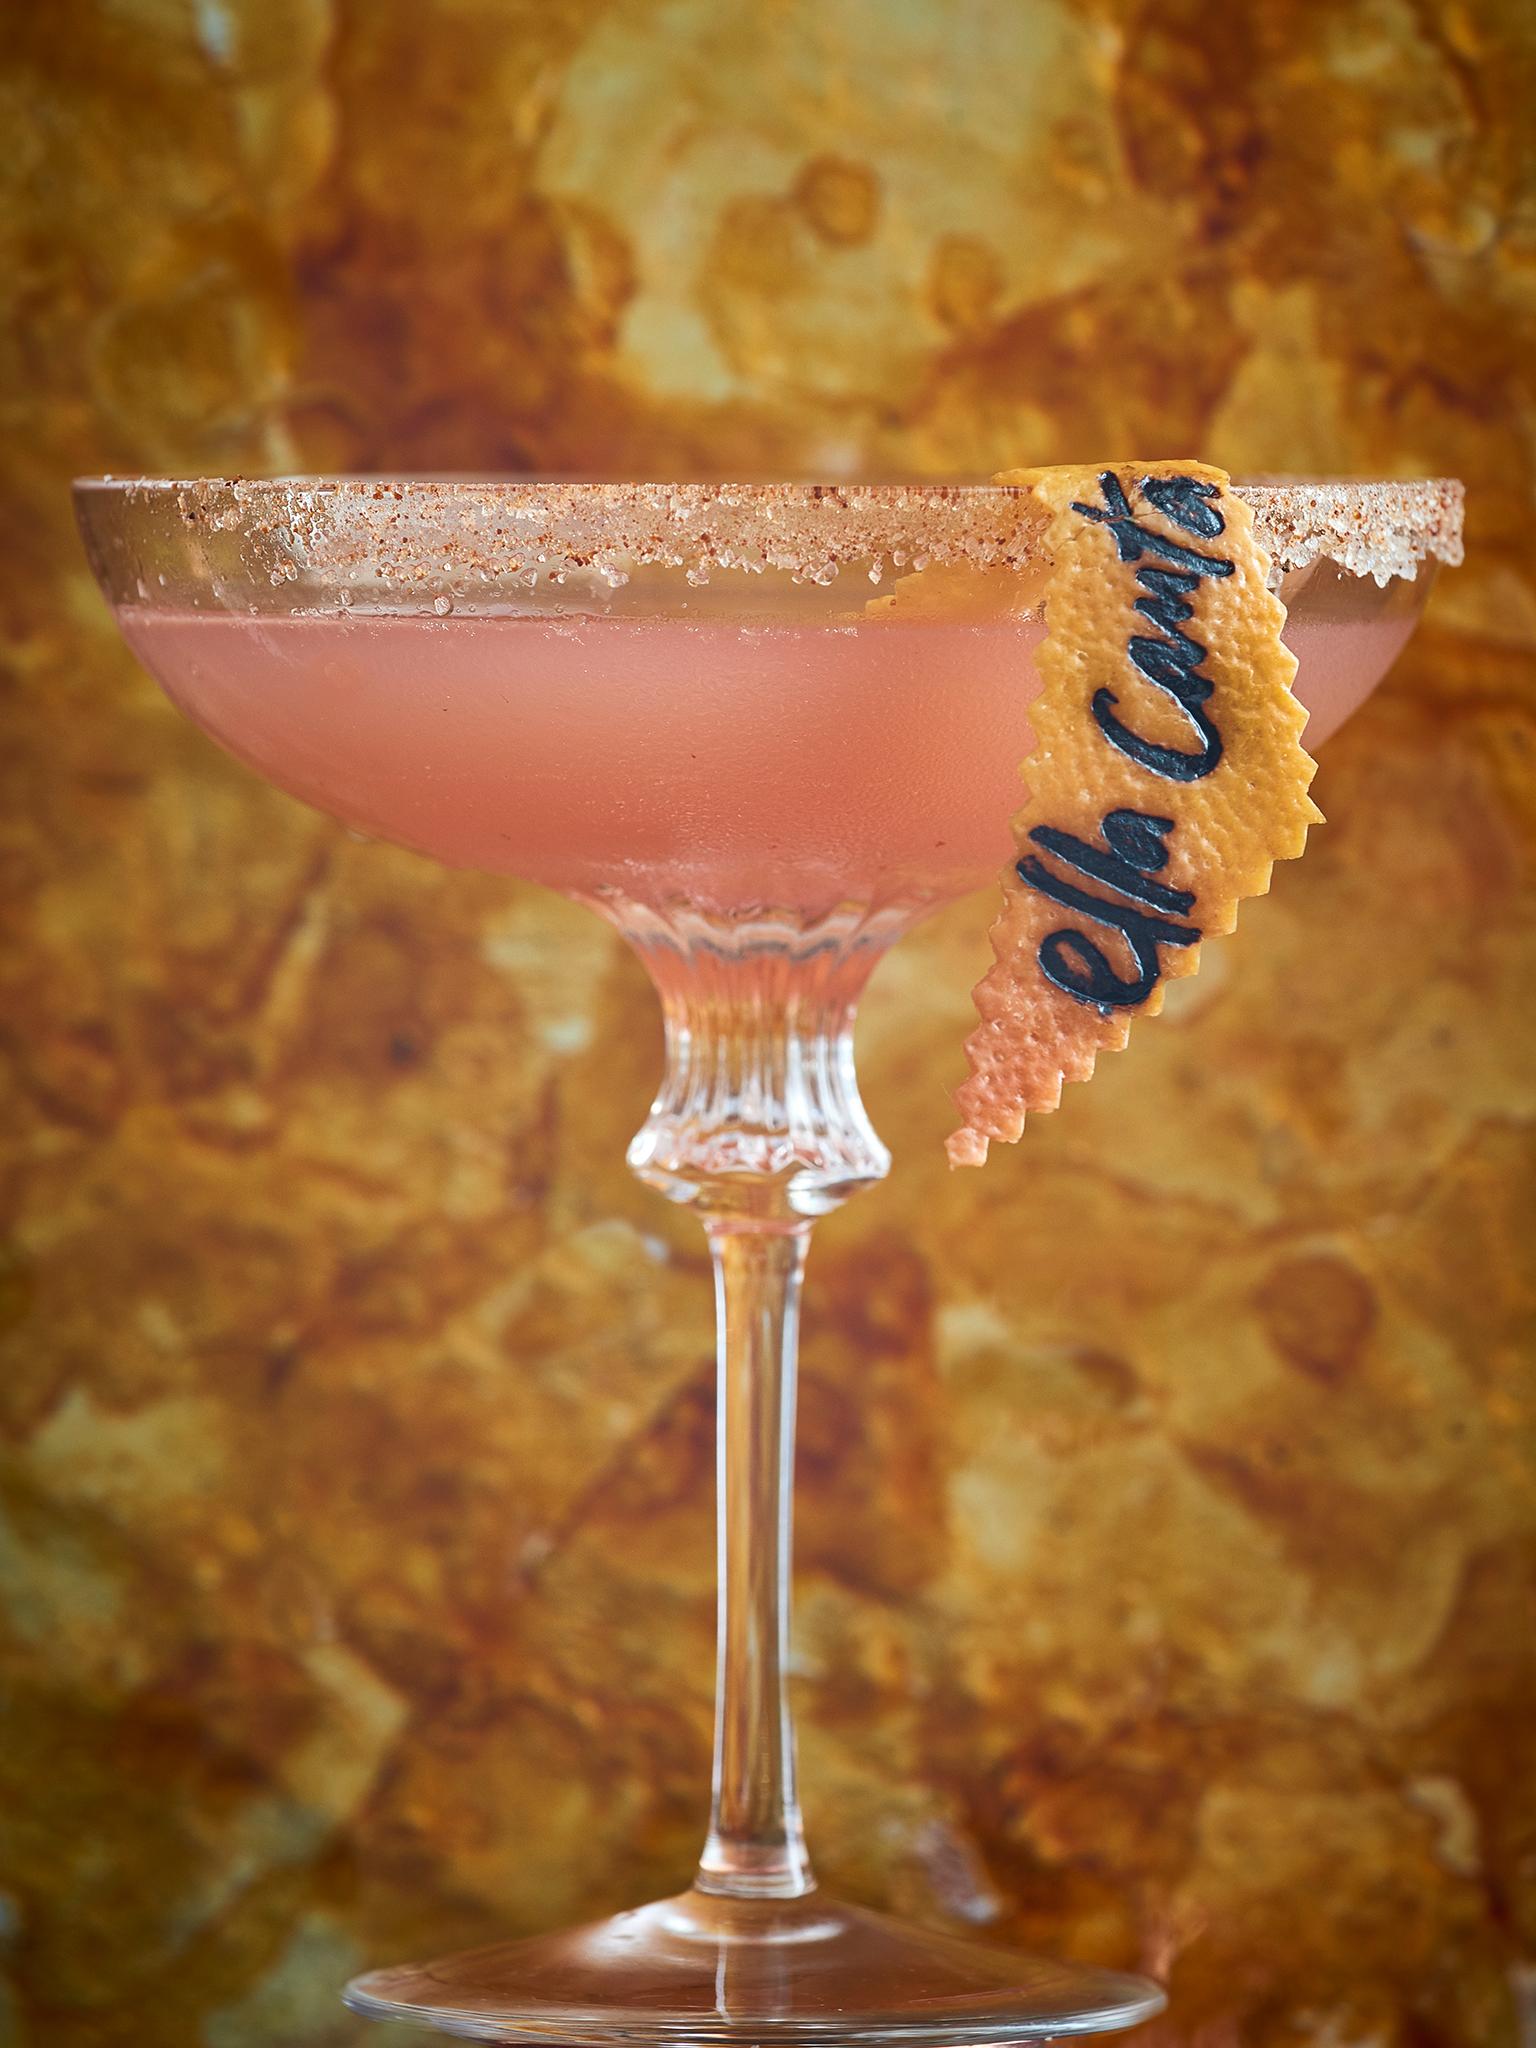 The Mayahuel cocktail